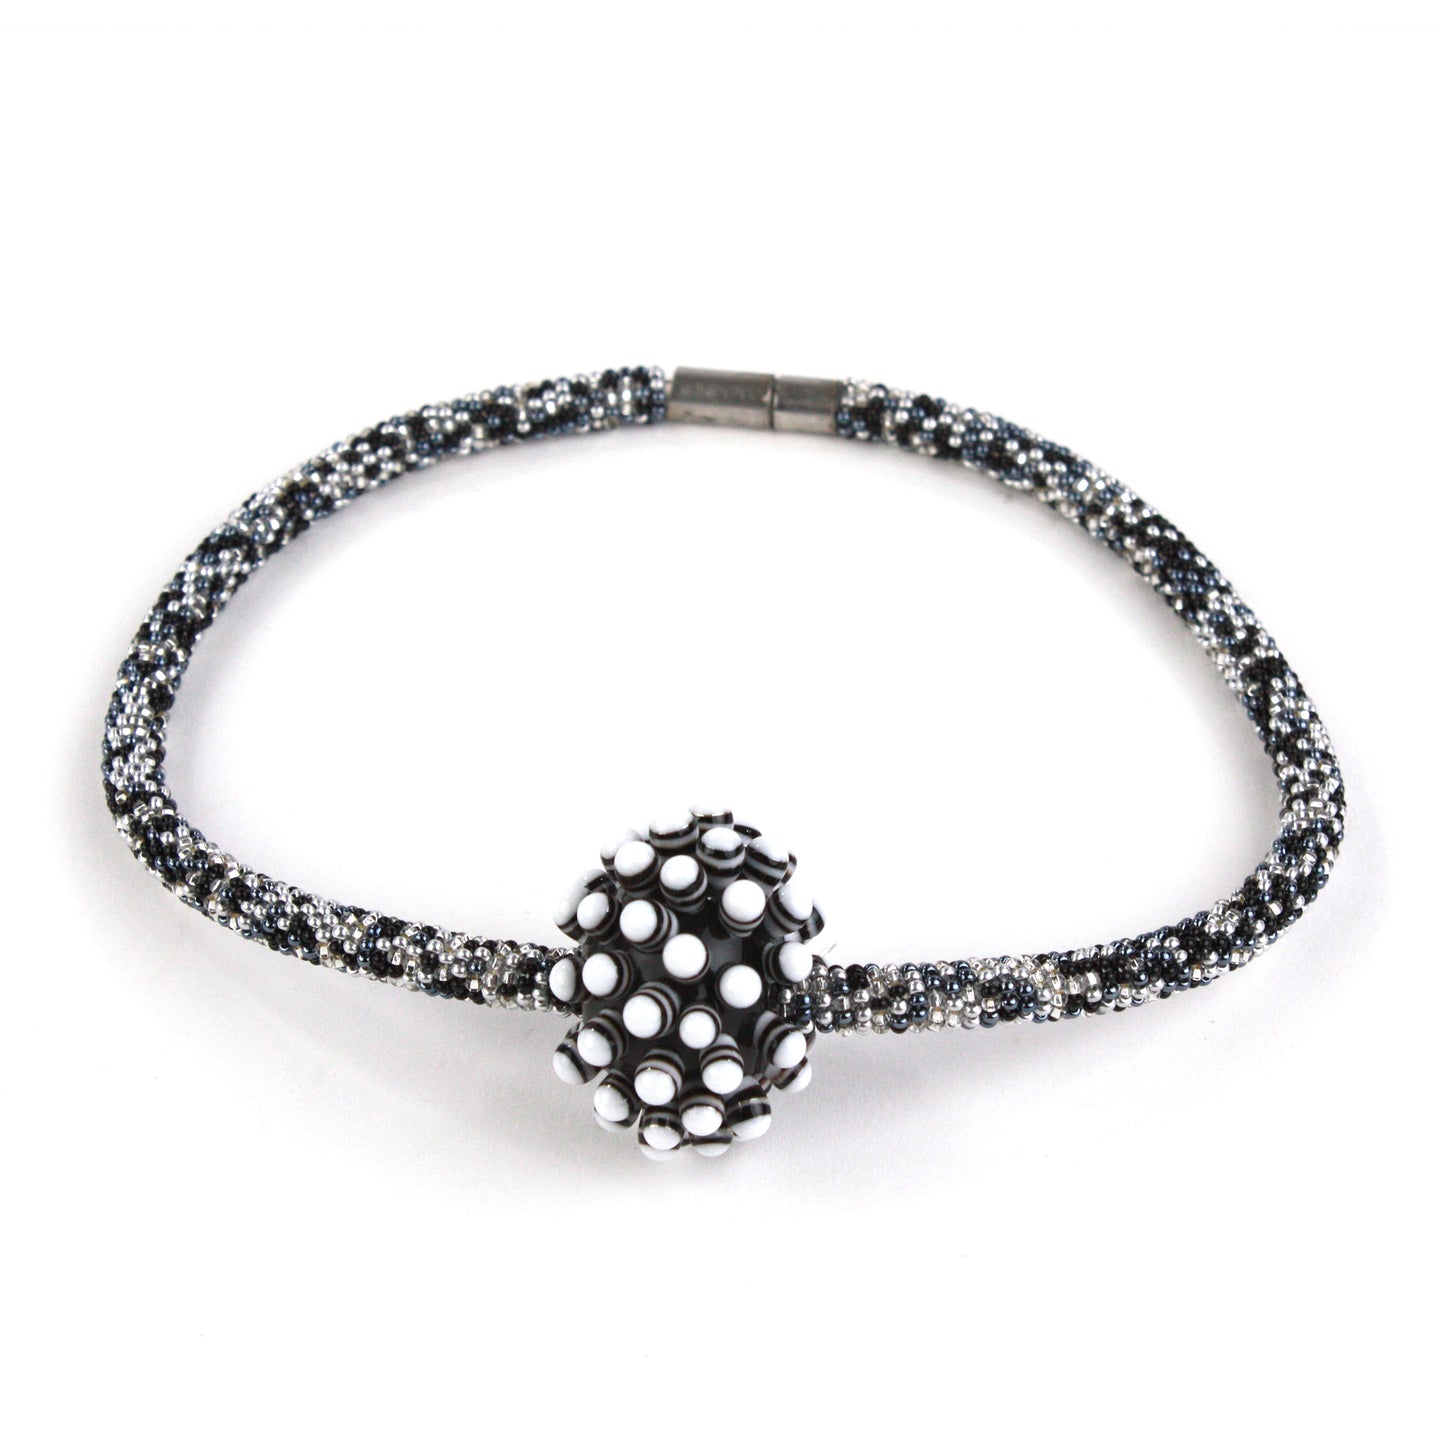 Stacked dot solo necklace-black and white